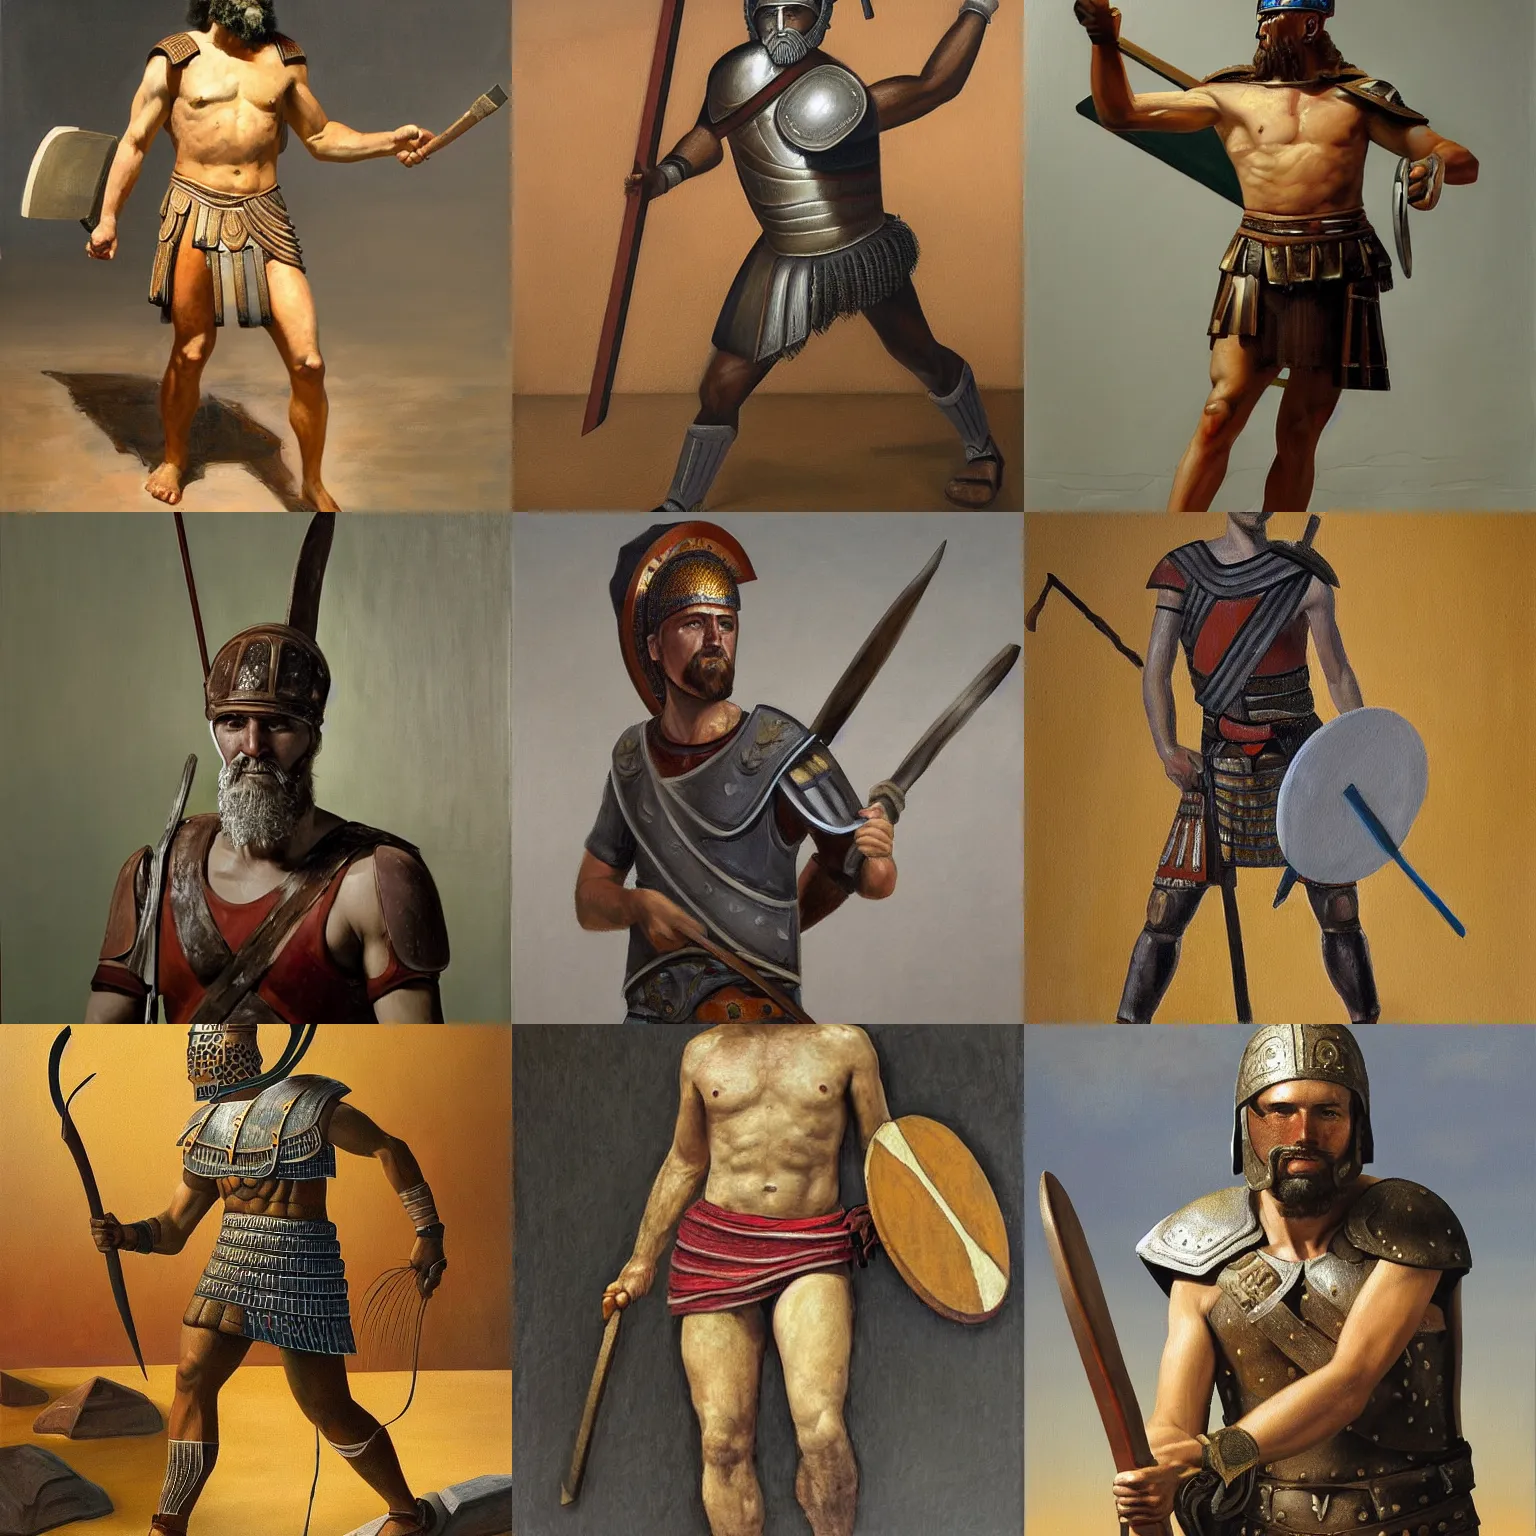 Prompt: the painting modern hoplite is a hyperrealistic portrayal of a ancient greek warrior, set against a precise and clinical background. the figure is realistically rendered, down to the smallest details, while the background is clean and sharp. this juxtaposition creates a jarring and disorienting effect, as the figure appears to be out of place in the modern setting